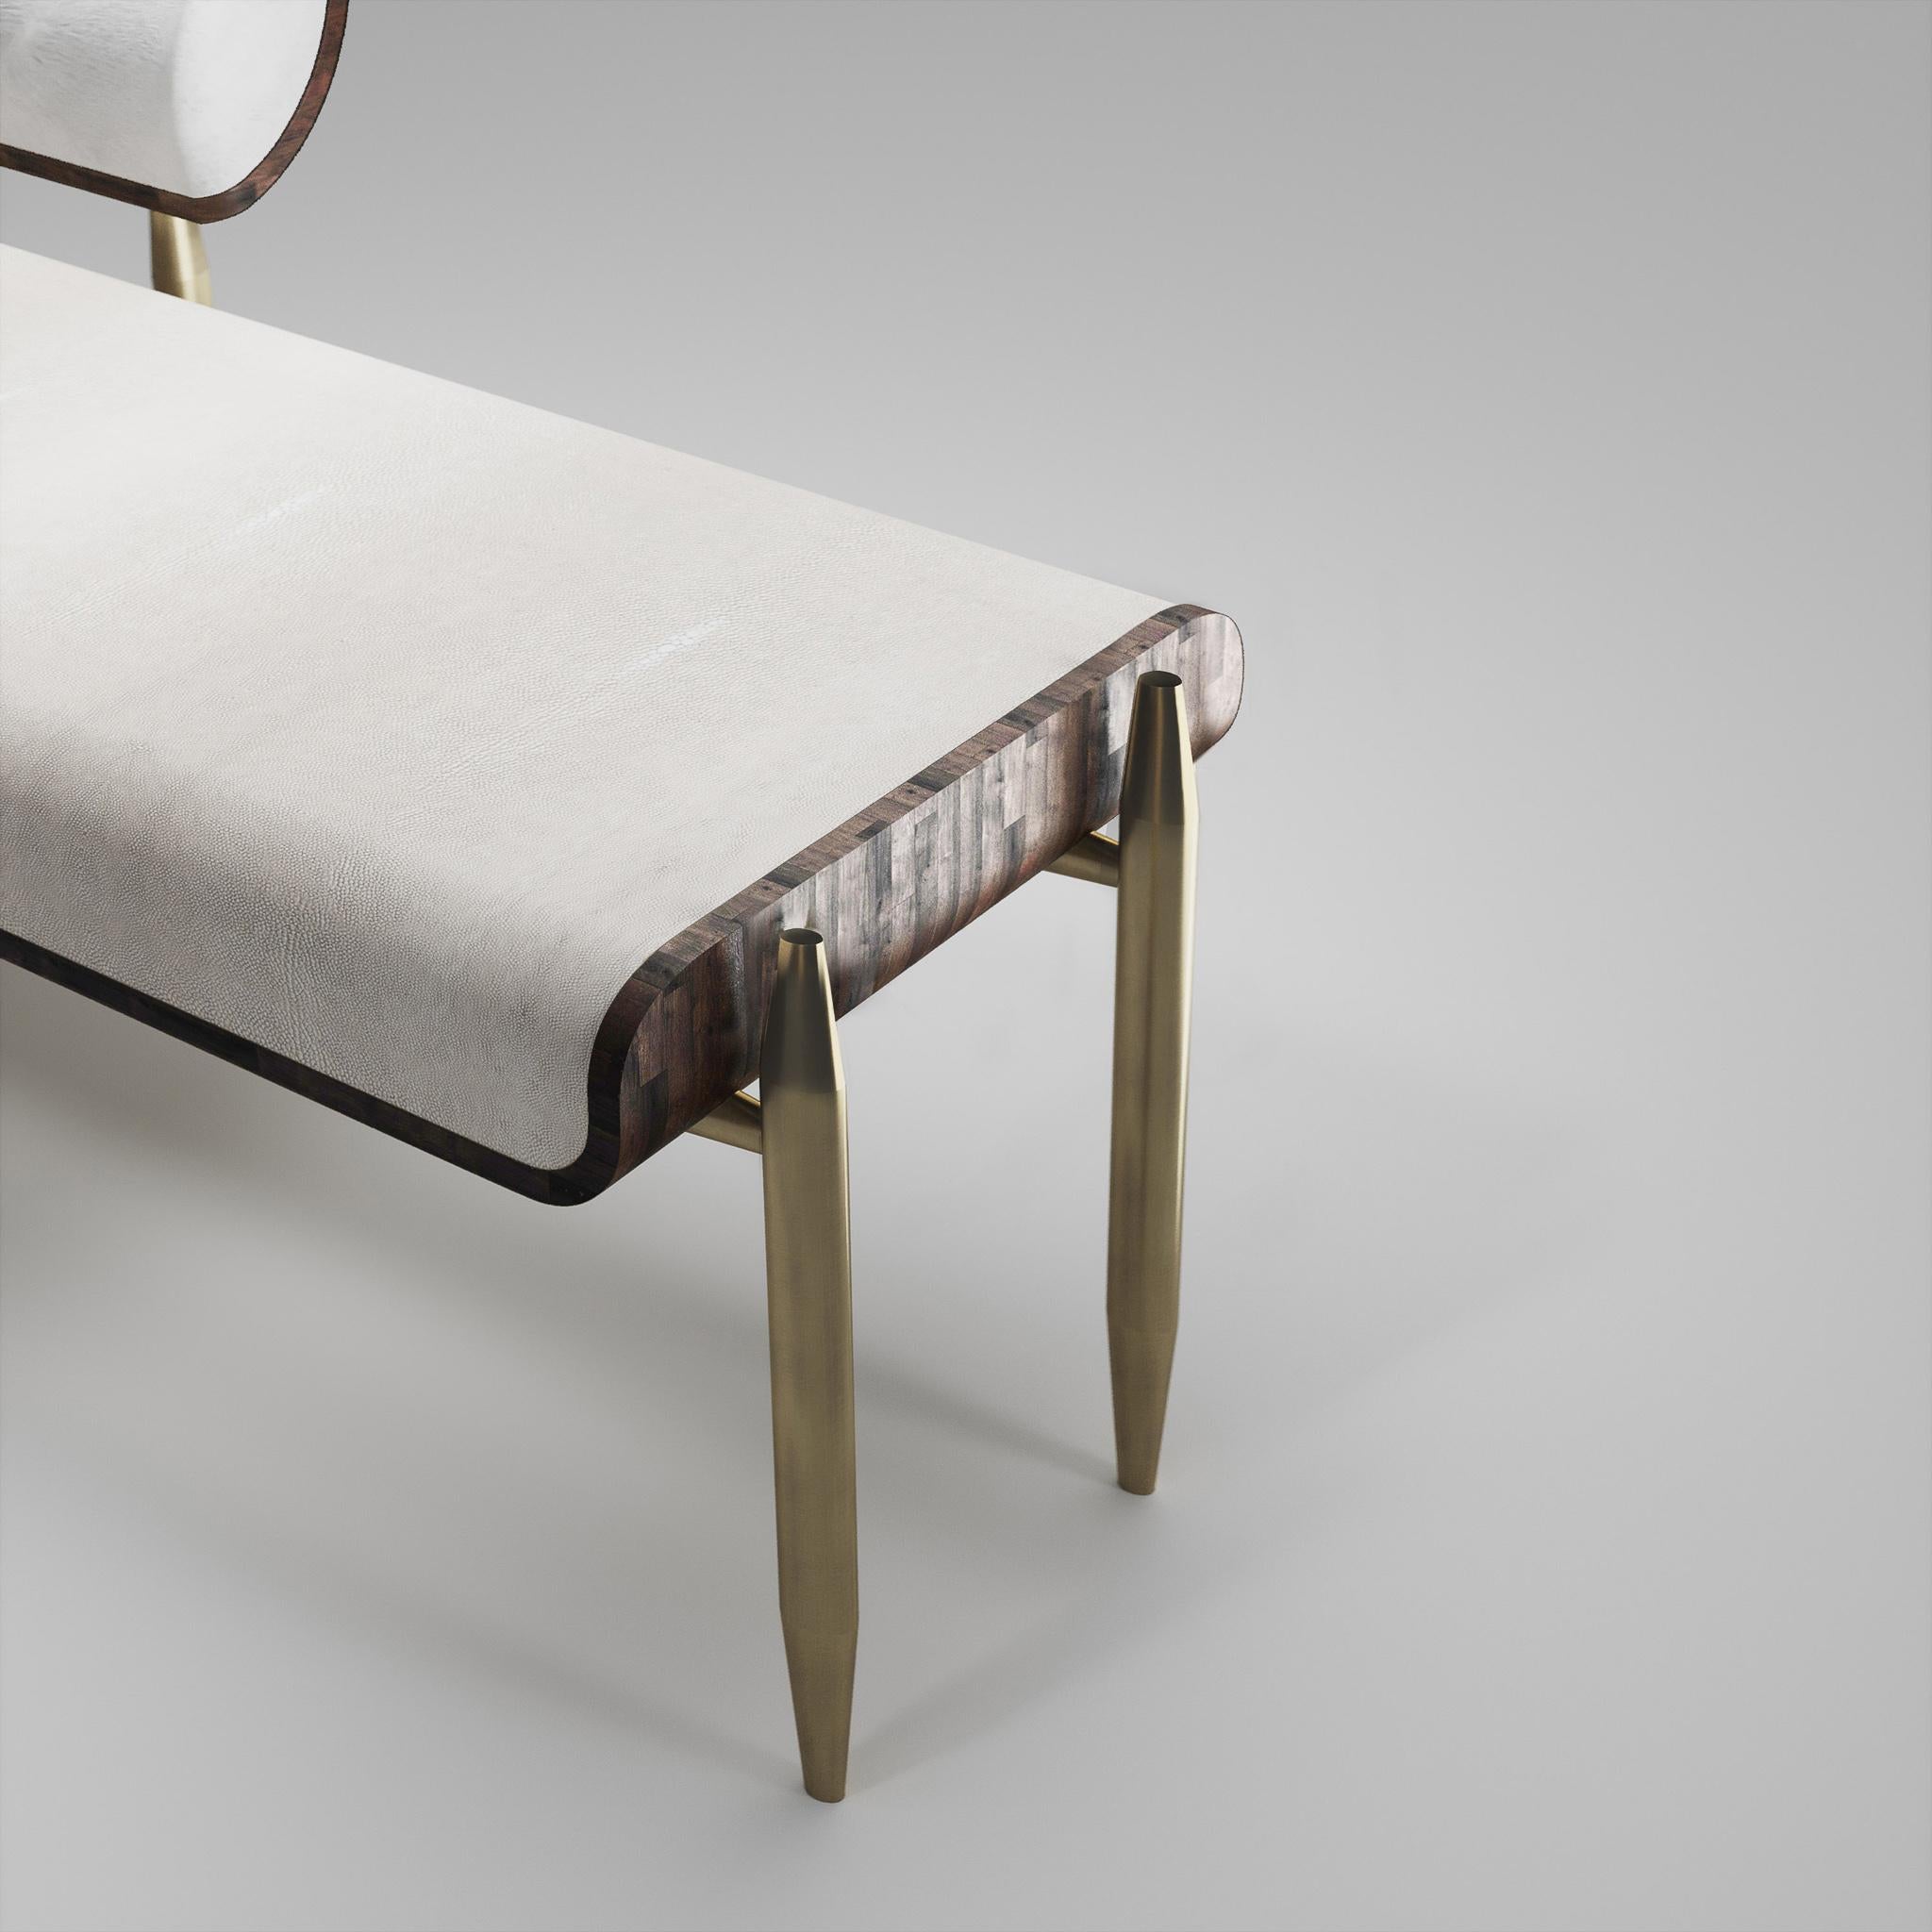 Inspired by the original Dandy Bench by Kifu Paris (see images at end of slide), the Dandy II day bed is the ultimate luxury seating. The seating area is inlaid in cream shagreen, the frame and sides of the bench in Palmwood and the legs are